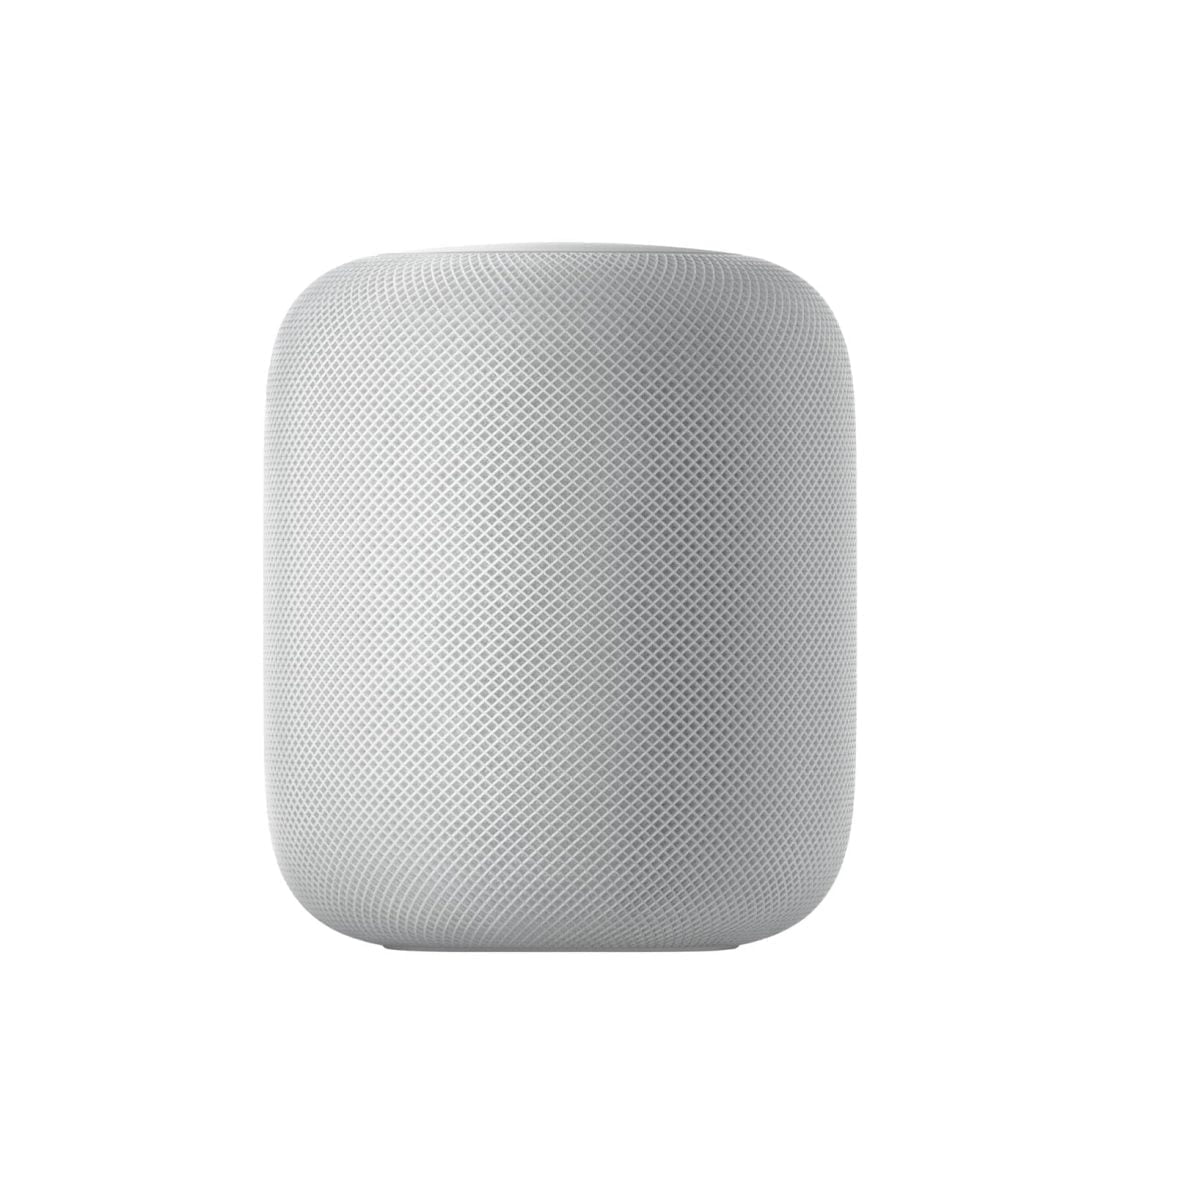 5902411 Sd Apple &Amp;Lt;P Class=&Amp;Quot;Hero-Intro Typography-Intro-Elevated Transition-2&Amp;Quot;&Amp;Gt;Homepod Is A Breakthrough Speaker That Adapts To Its Location And Delivers High-Fidelity Audio Wherever It’s Playing. Together With Apple Music And Siri, It Creates An Entirely New Way For You To Discover And Interact With Music At Home. And It Can Help You And Your Whole Family With Everyday Tasks — And Control Your Smart Home — All With Just Your Voice.&Amp;Lt;/P&Amp;Gt; &Amp;Lt;Strong&Amp;Gt;One Year International Apple Warranty&Amp;Lt;/Strong&Amp;Gt; Requires Iphone Se, Iphone 6S Or Later, Or Ipod Touch (7Th Generation) With The Latest Ios; Or Ipad Pro, Ipad (5Th Generation Or Later), Ipad Air 2 Or Later, Or Ipad Mini 4 Or Later With The Latest Ipados. Apple Homepod Smart Speaker - White Apple Homepod Smart Speaker - White